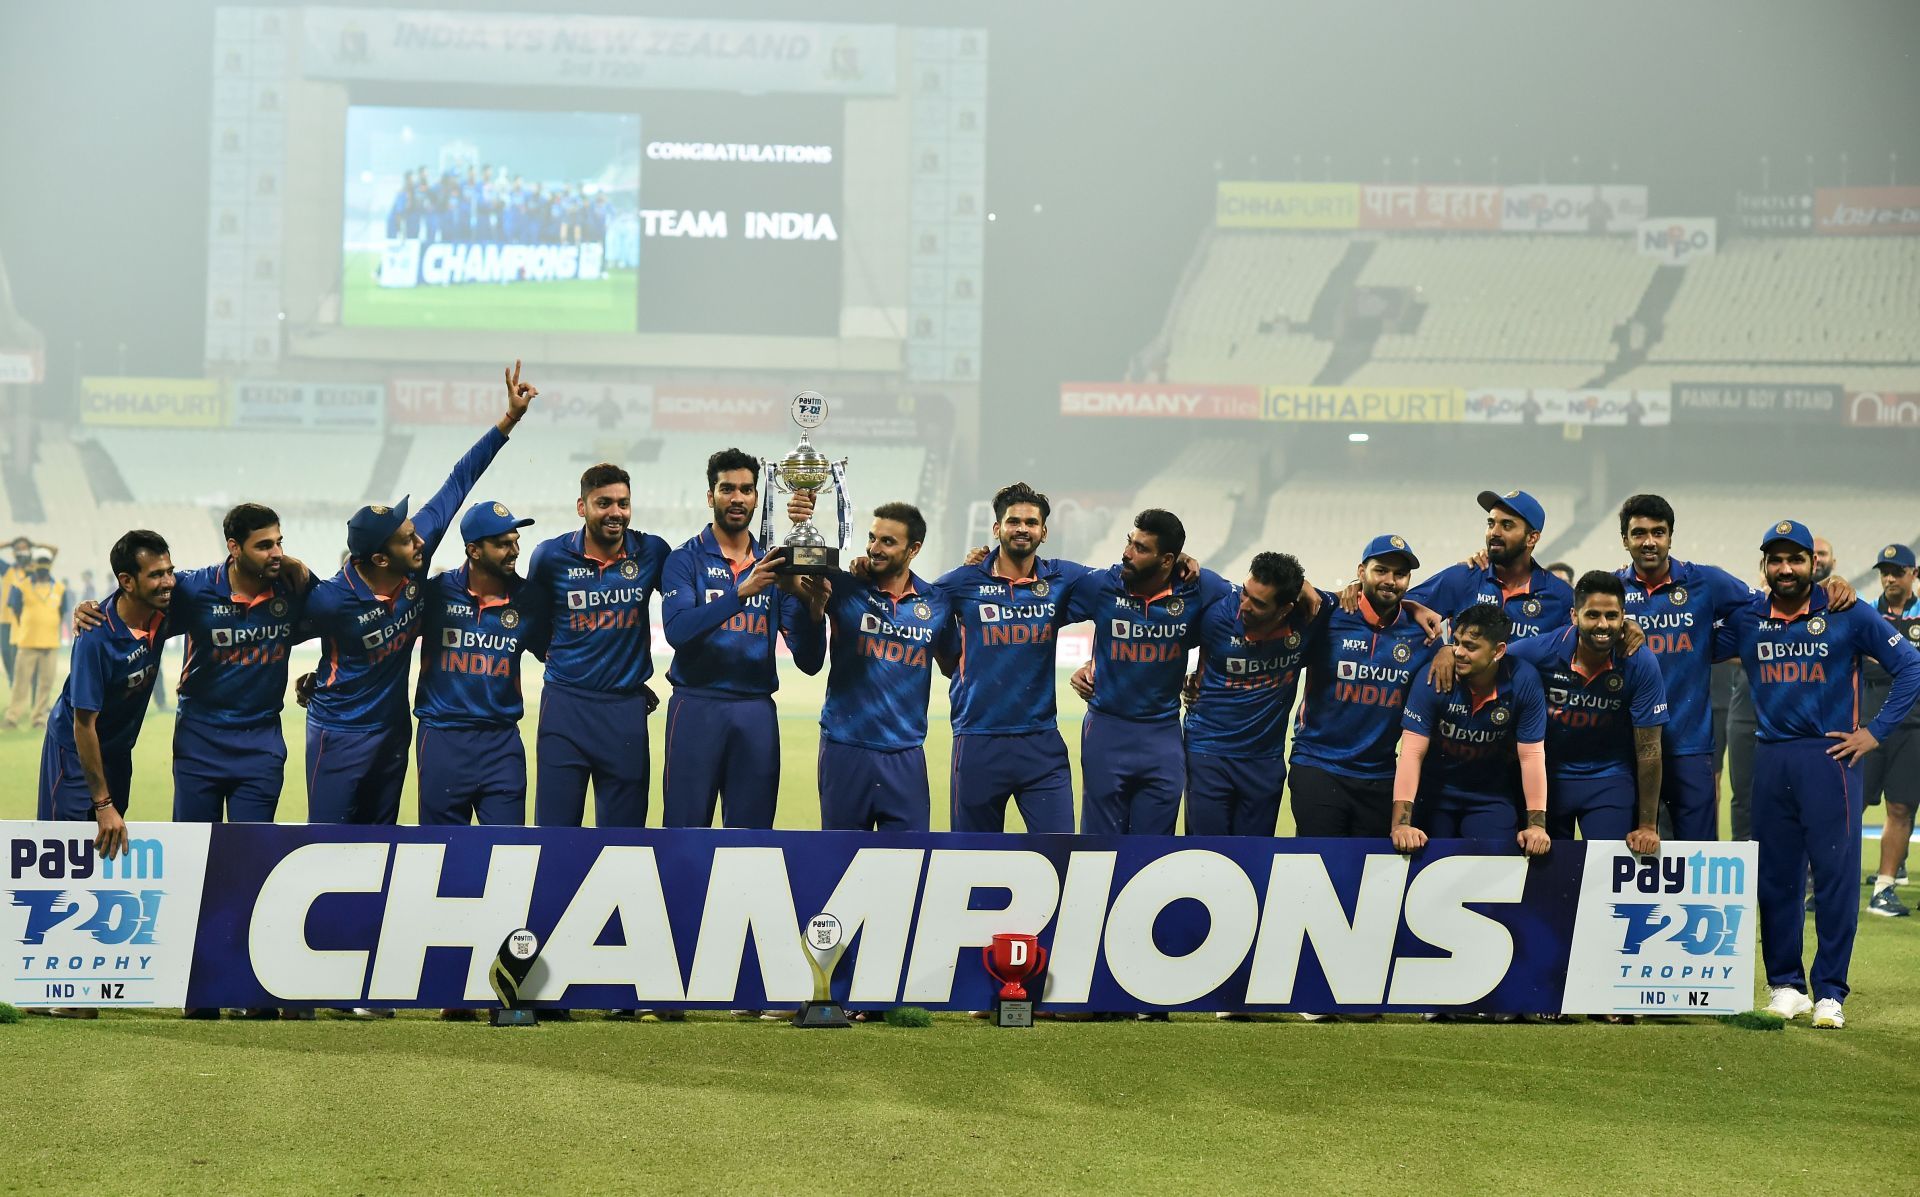 India overtook England to become the No.1 ranked T20 team in the world